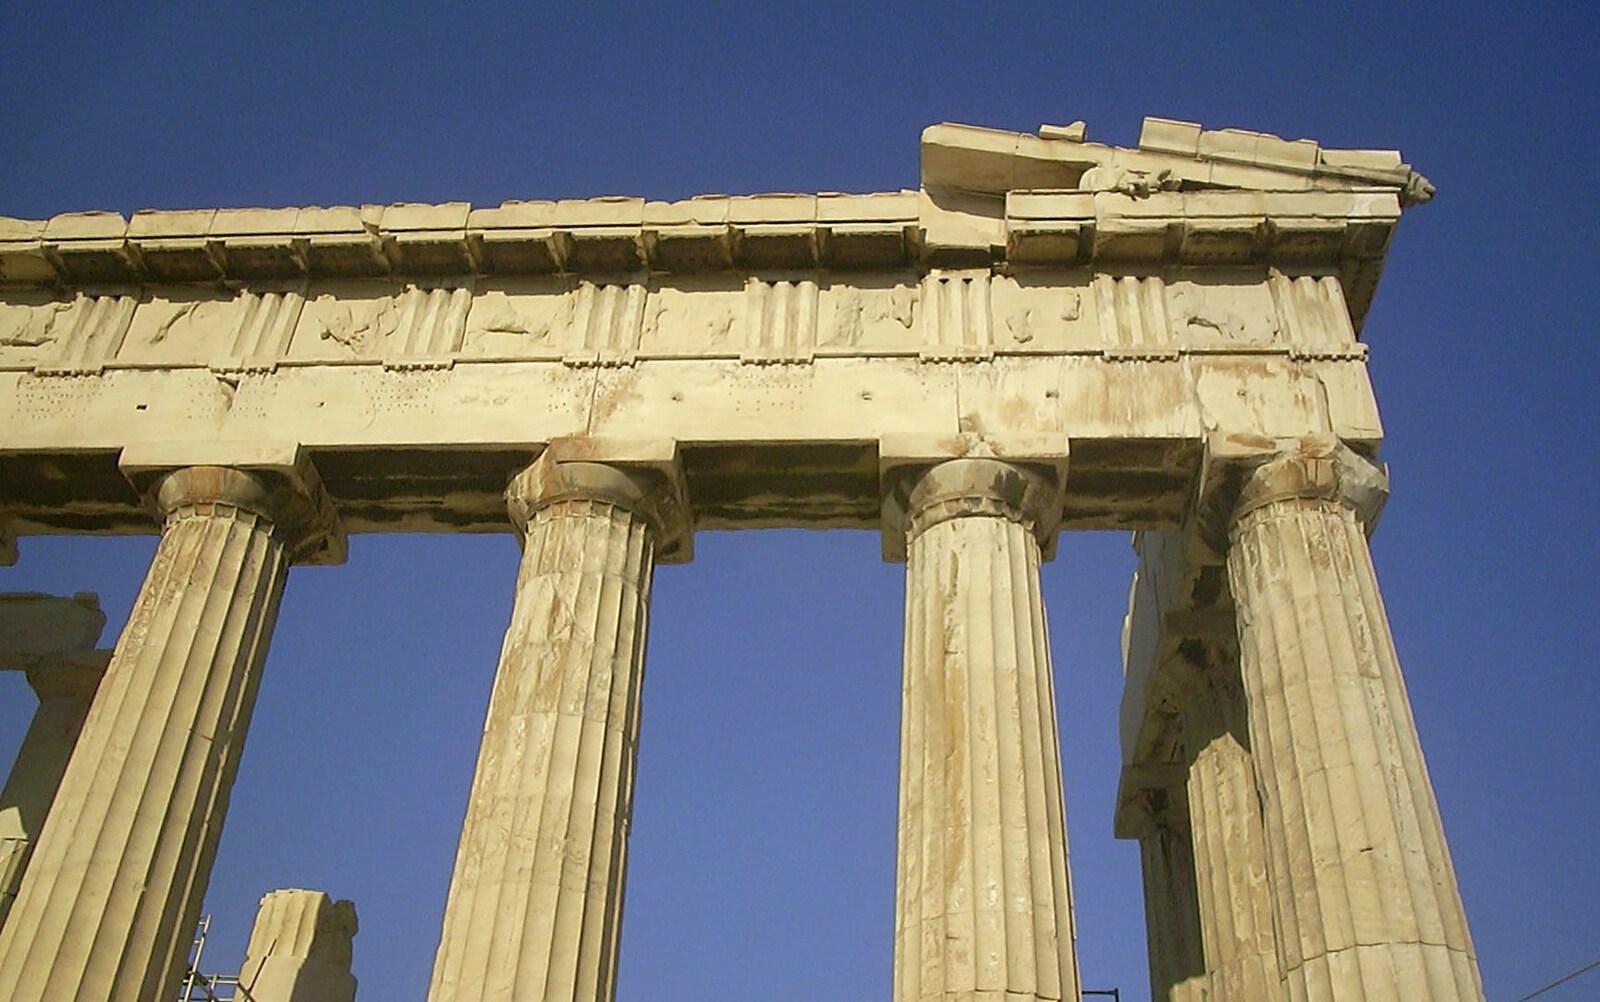 The Parthenon's columns from A Postcard From Athens: A Day Trip to the Olympics, Greece - 19th August 2004